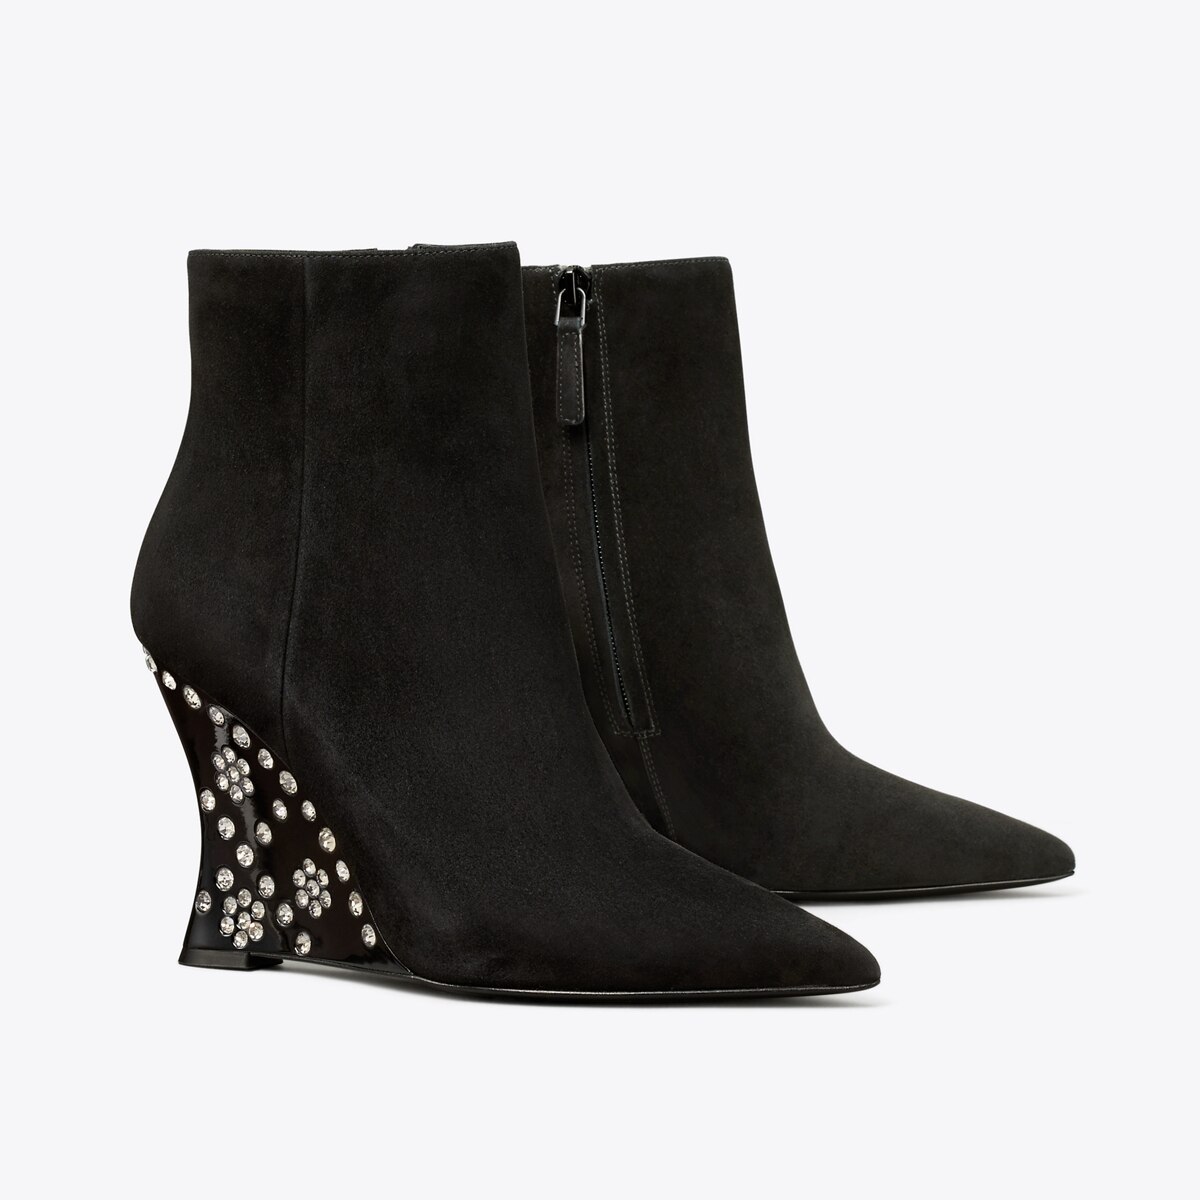 Jeweled Flower Boot: Women's Designer Ankle Boots | Tory Burch